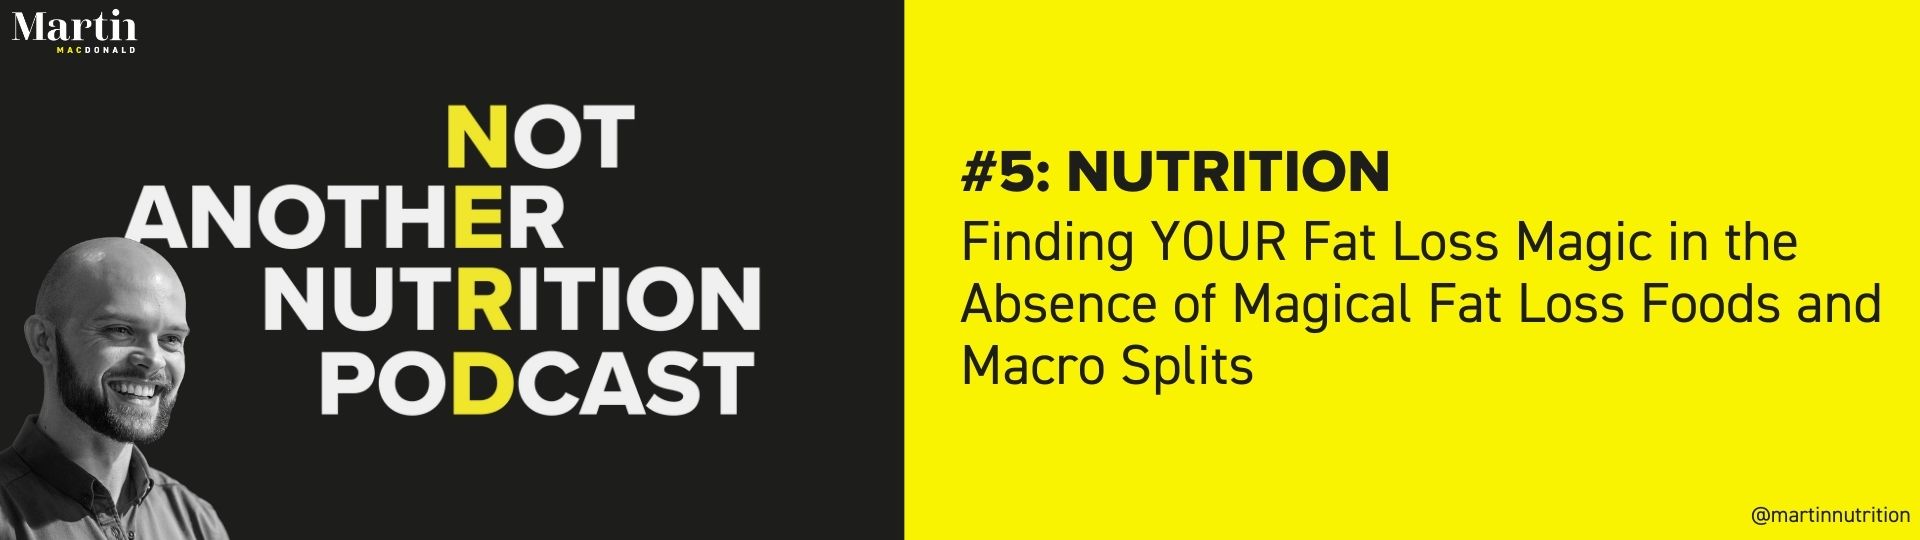 Finding YOUR Fat Loss Magic in the Absence of Magical Fat Loss Foods and Macro Splits